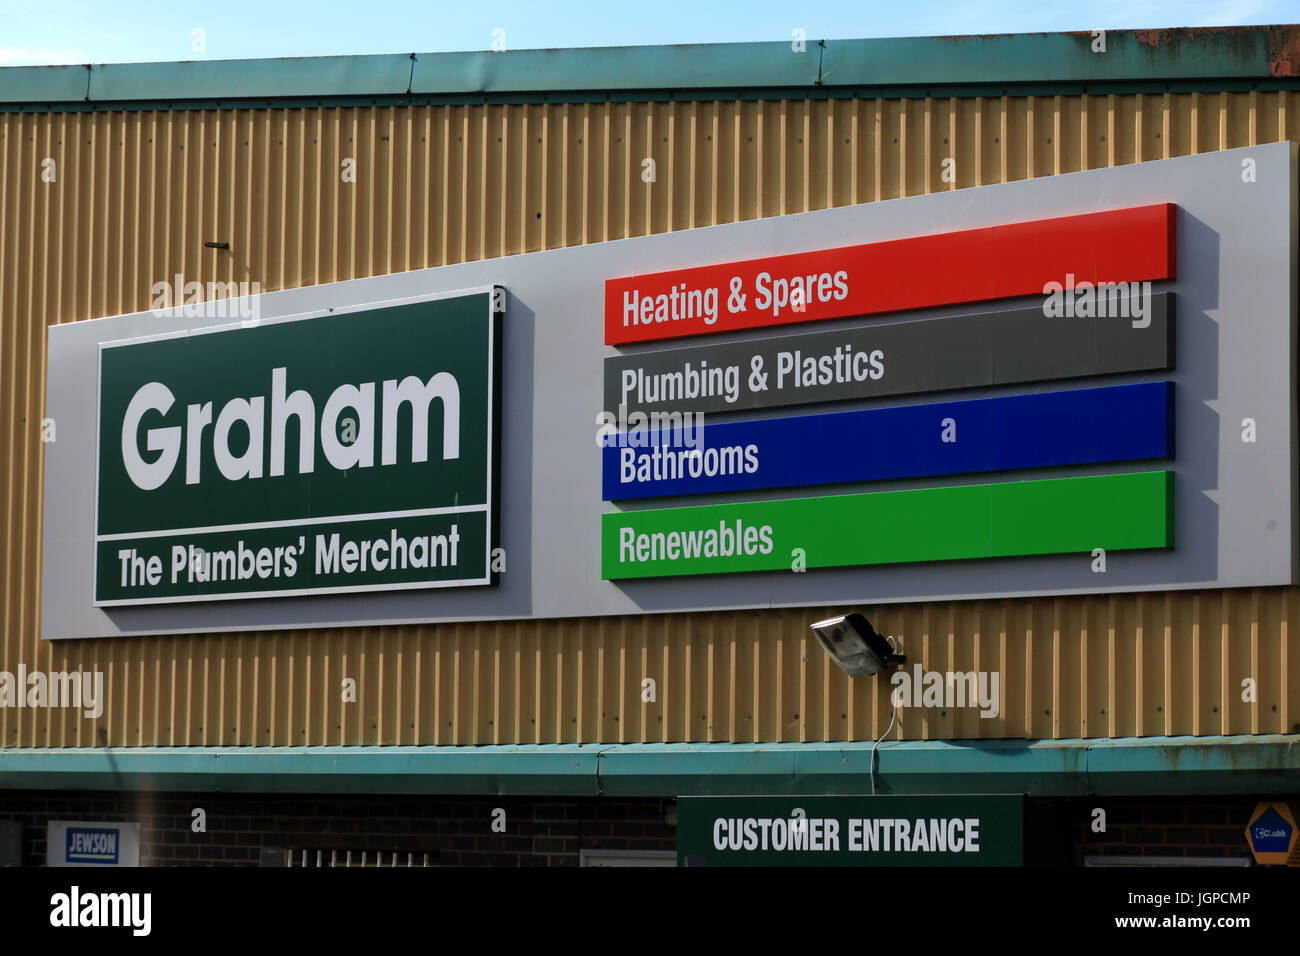 Chelmsford, Essex - 26 June 2017, Graham plumbers merchant sign in Dukes Park industrial area Stock Photo